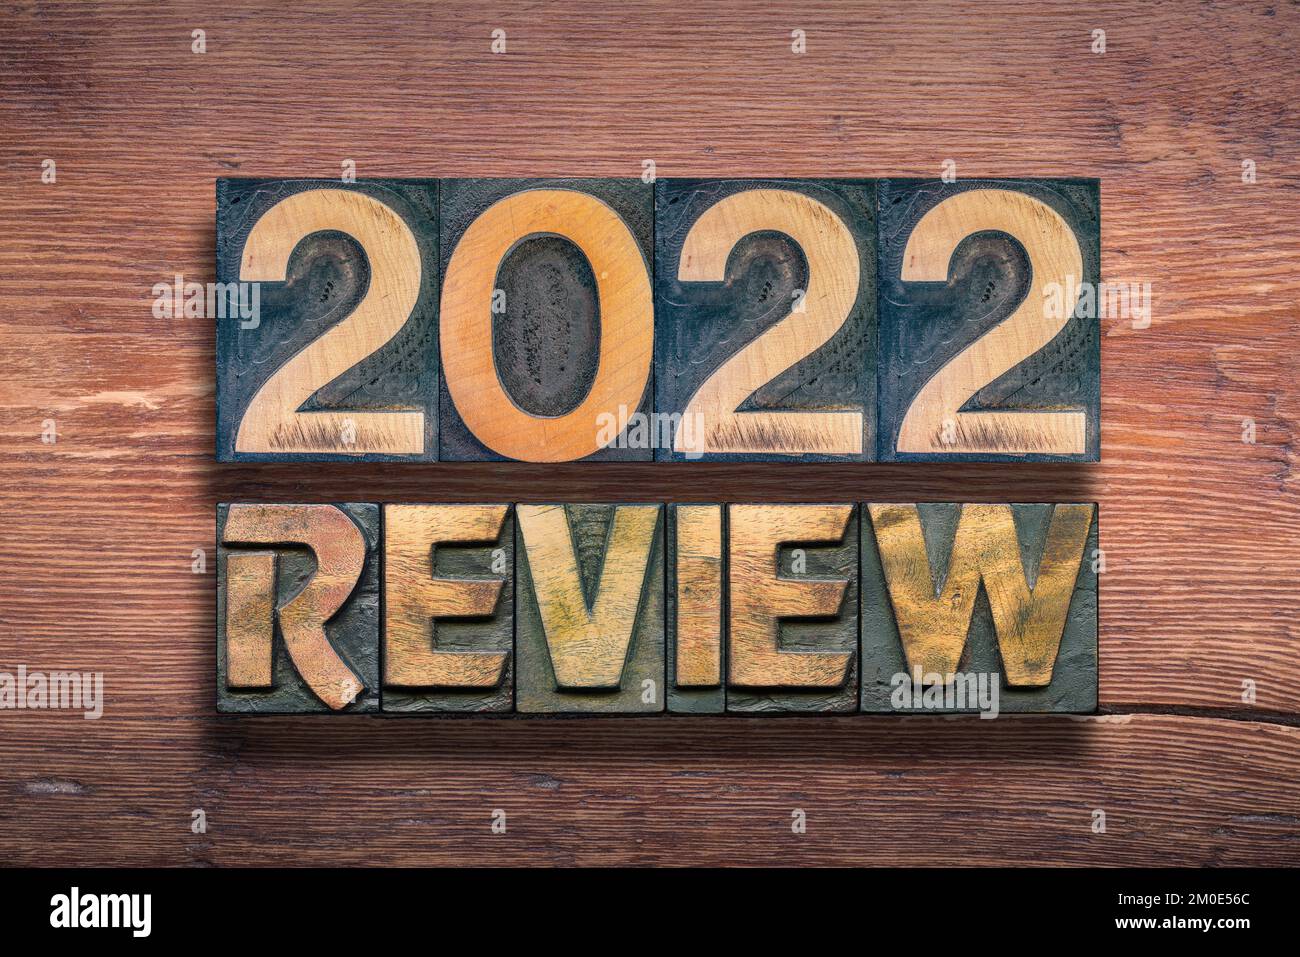 review 2022 phrase combined from vintage letterpress on wooden surface Stock Photo